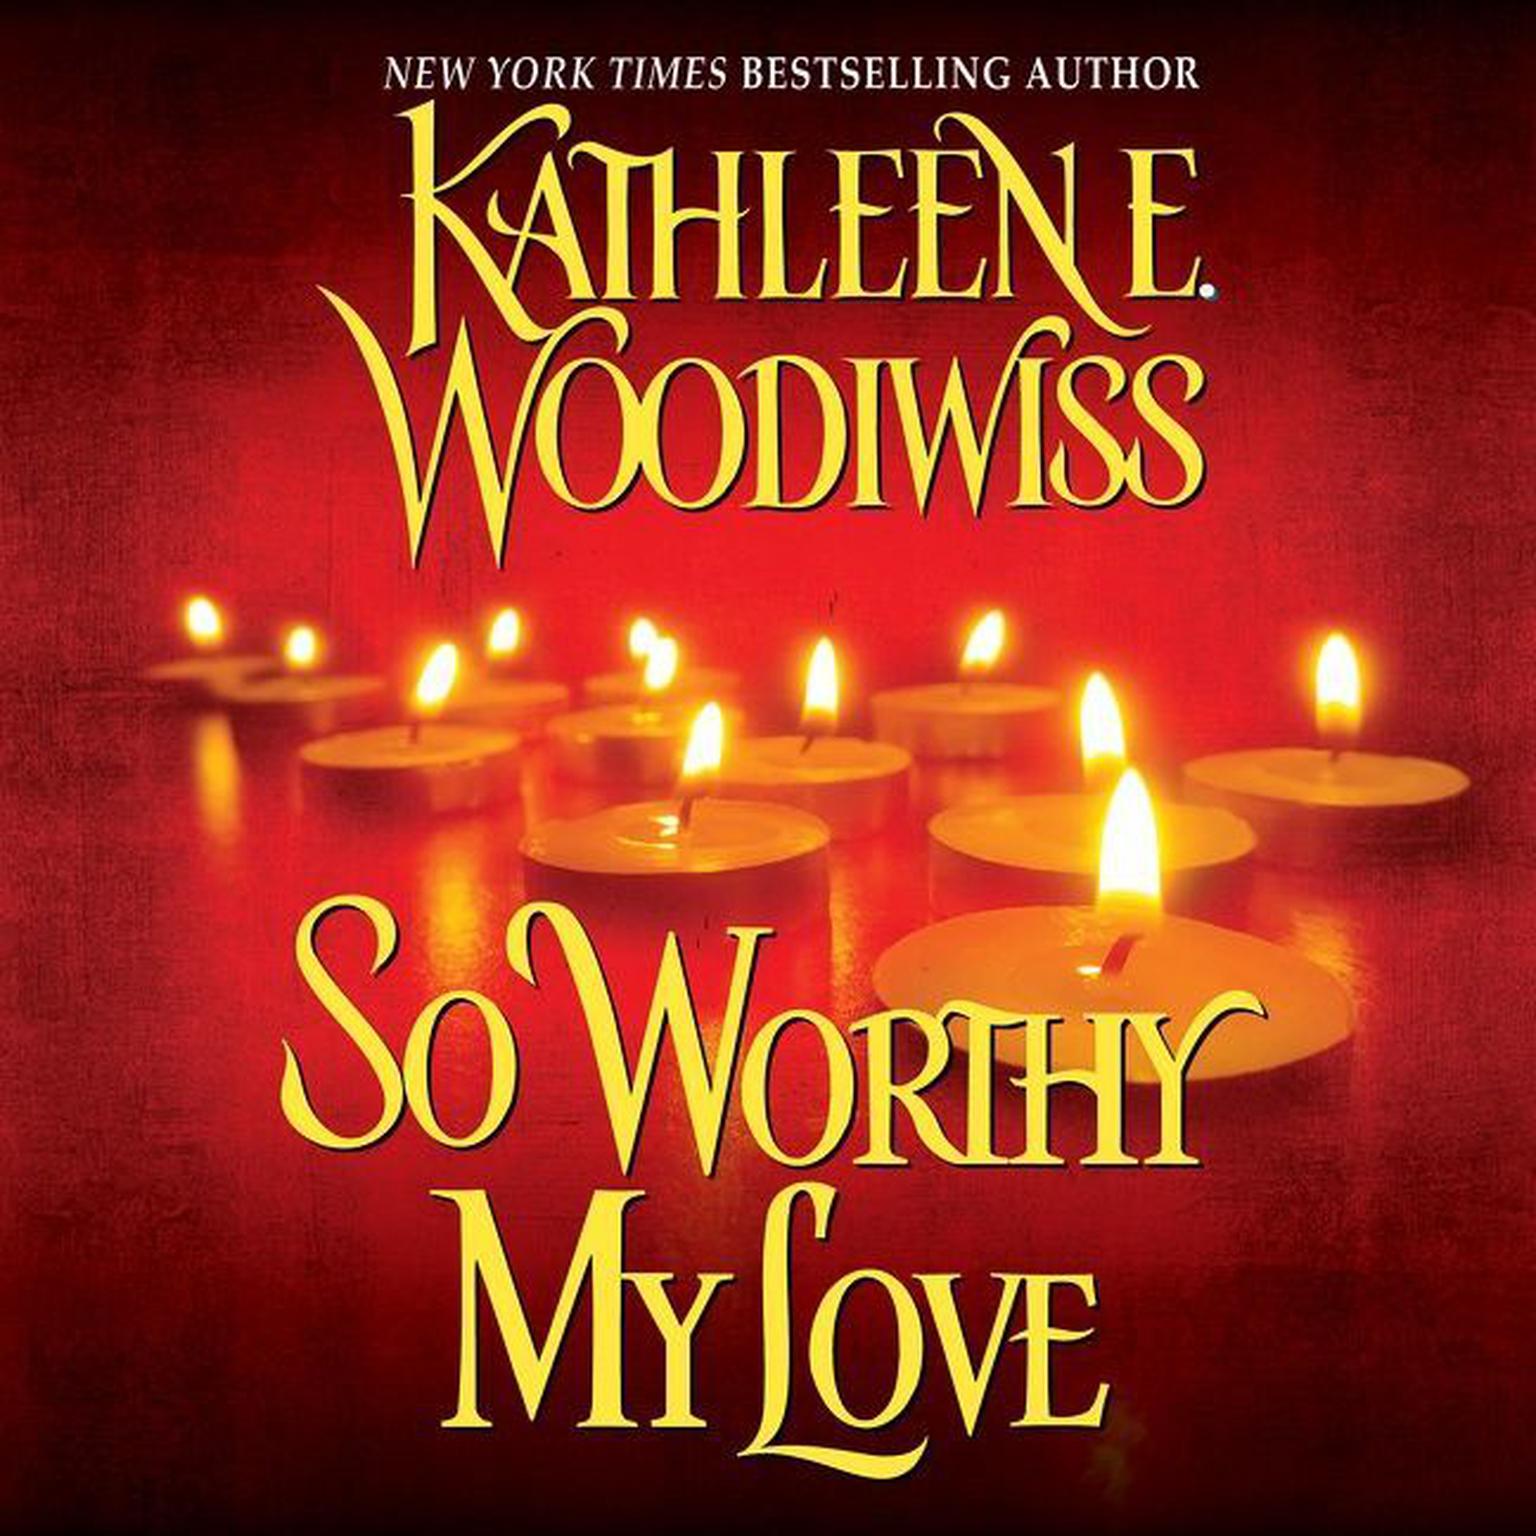 So Worthy My Love Audiobook, by Kathleen E. Woodiwiss